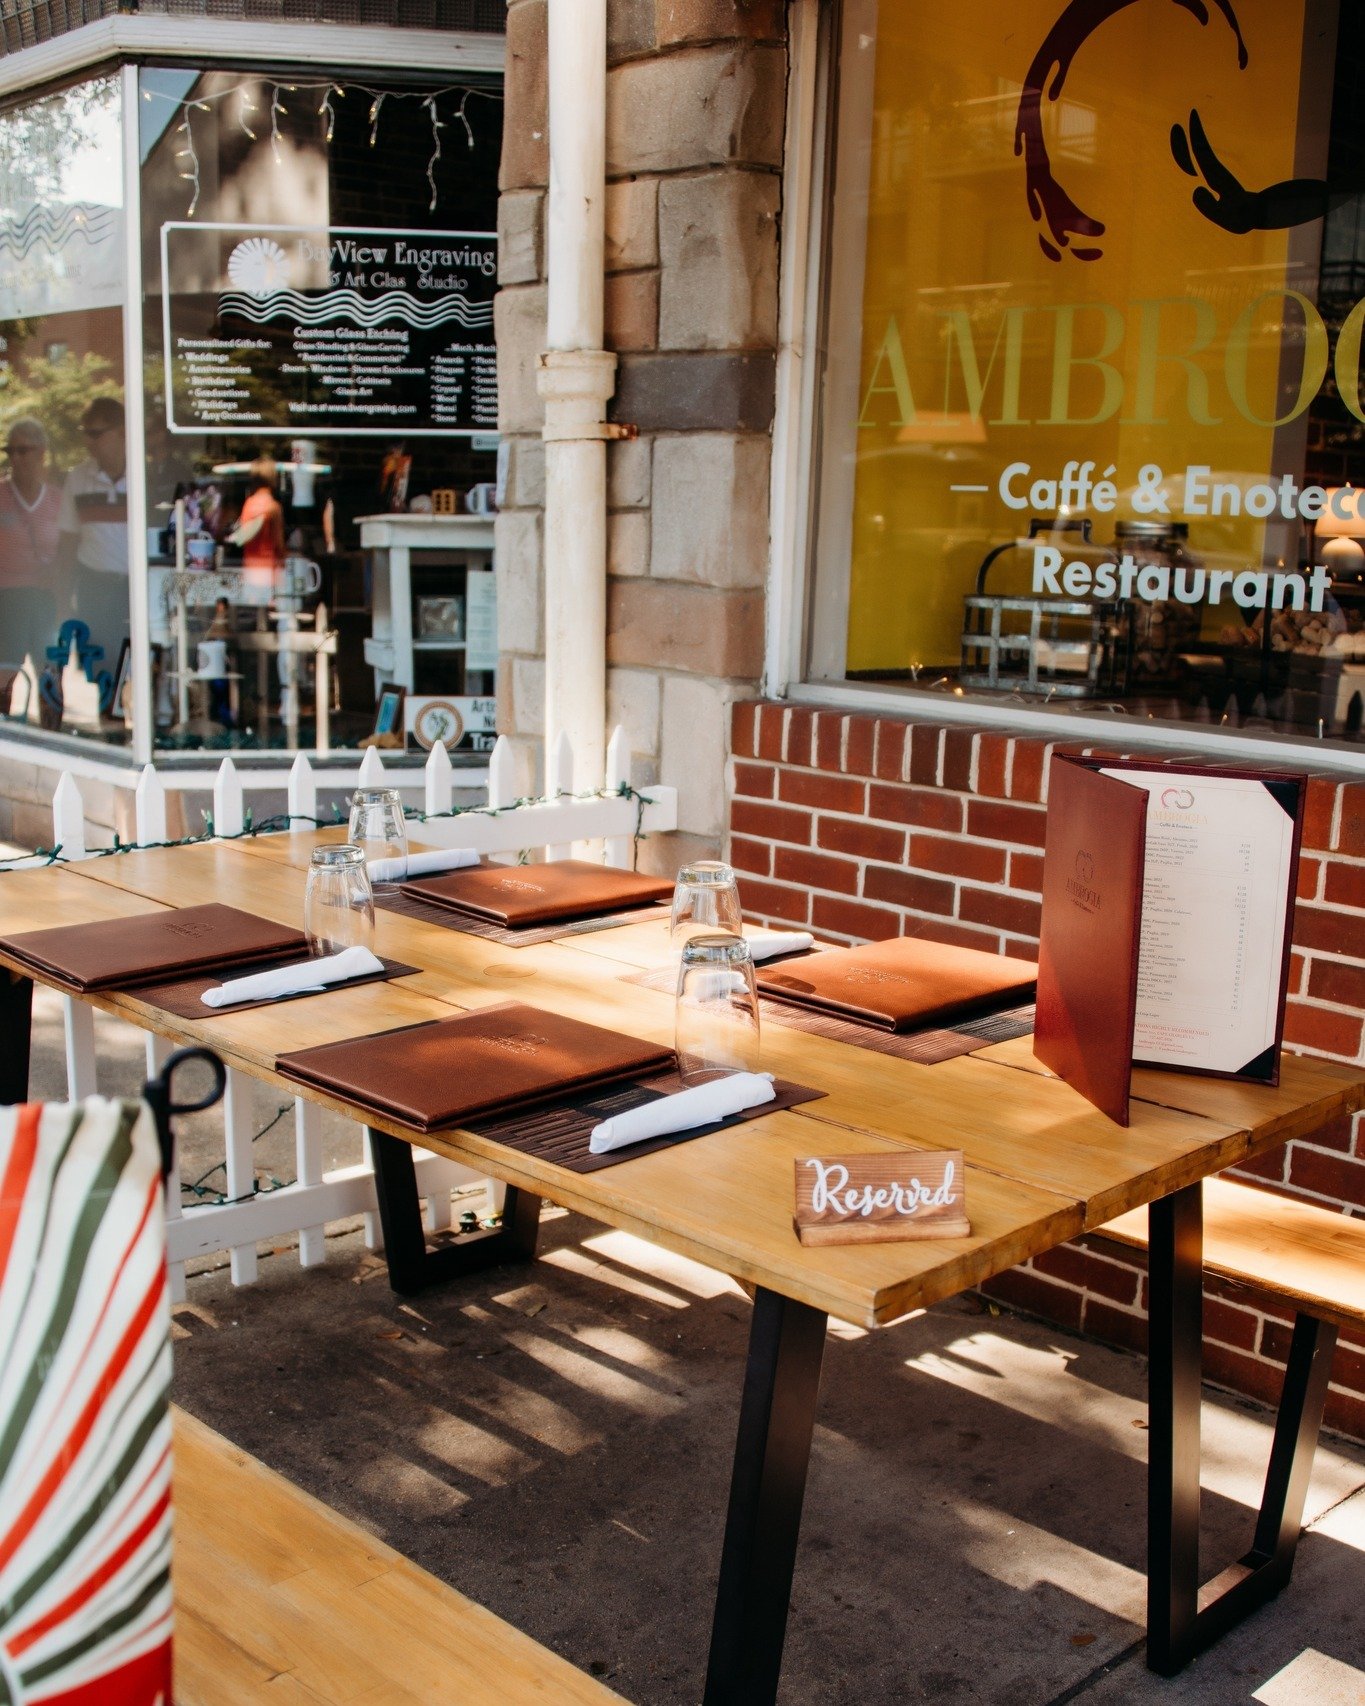 ☀️Embrace the sunshine with us ☀ 

We've had some absolutely beautiful days lately, and you know what that means &ndash; it's patio season! 

Time to soak up the rays and savor delicious meals al fresco. 🍽️ Don't miss out on the chance to enjoy our 